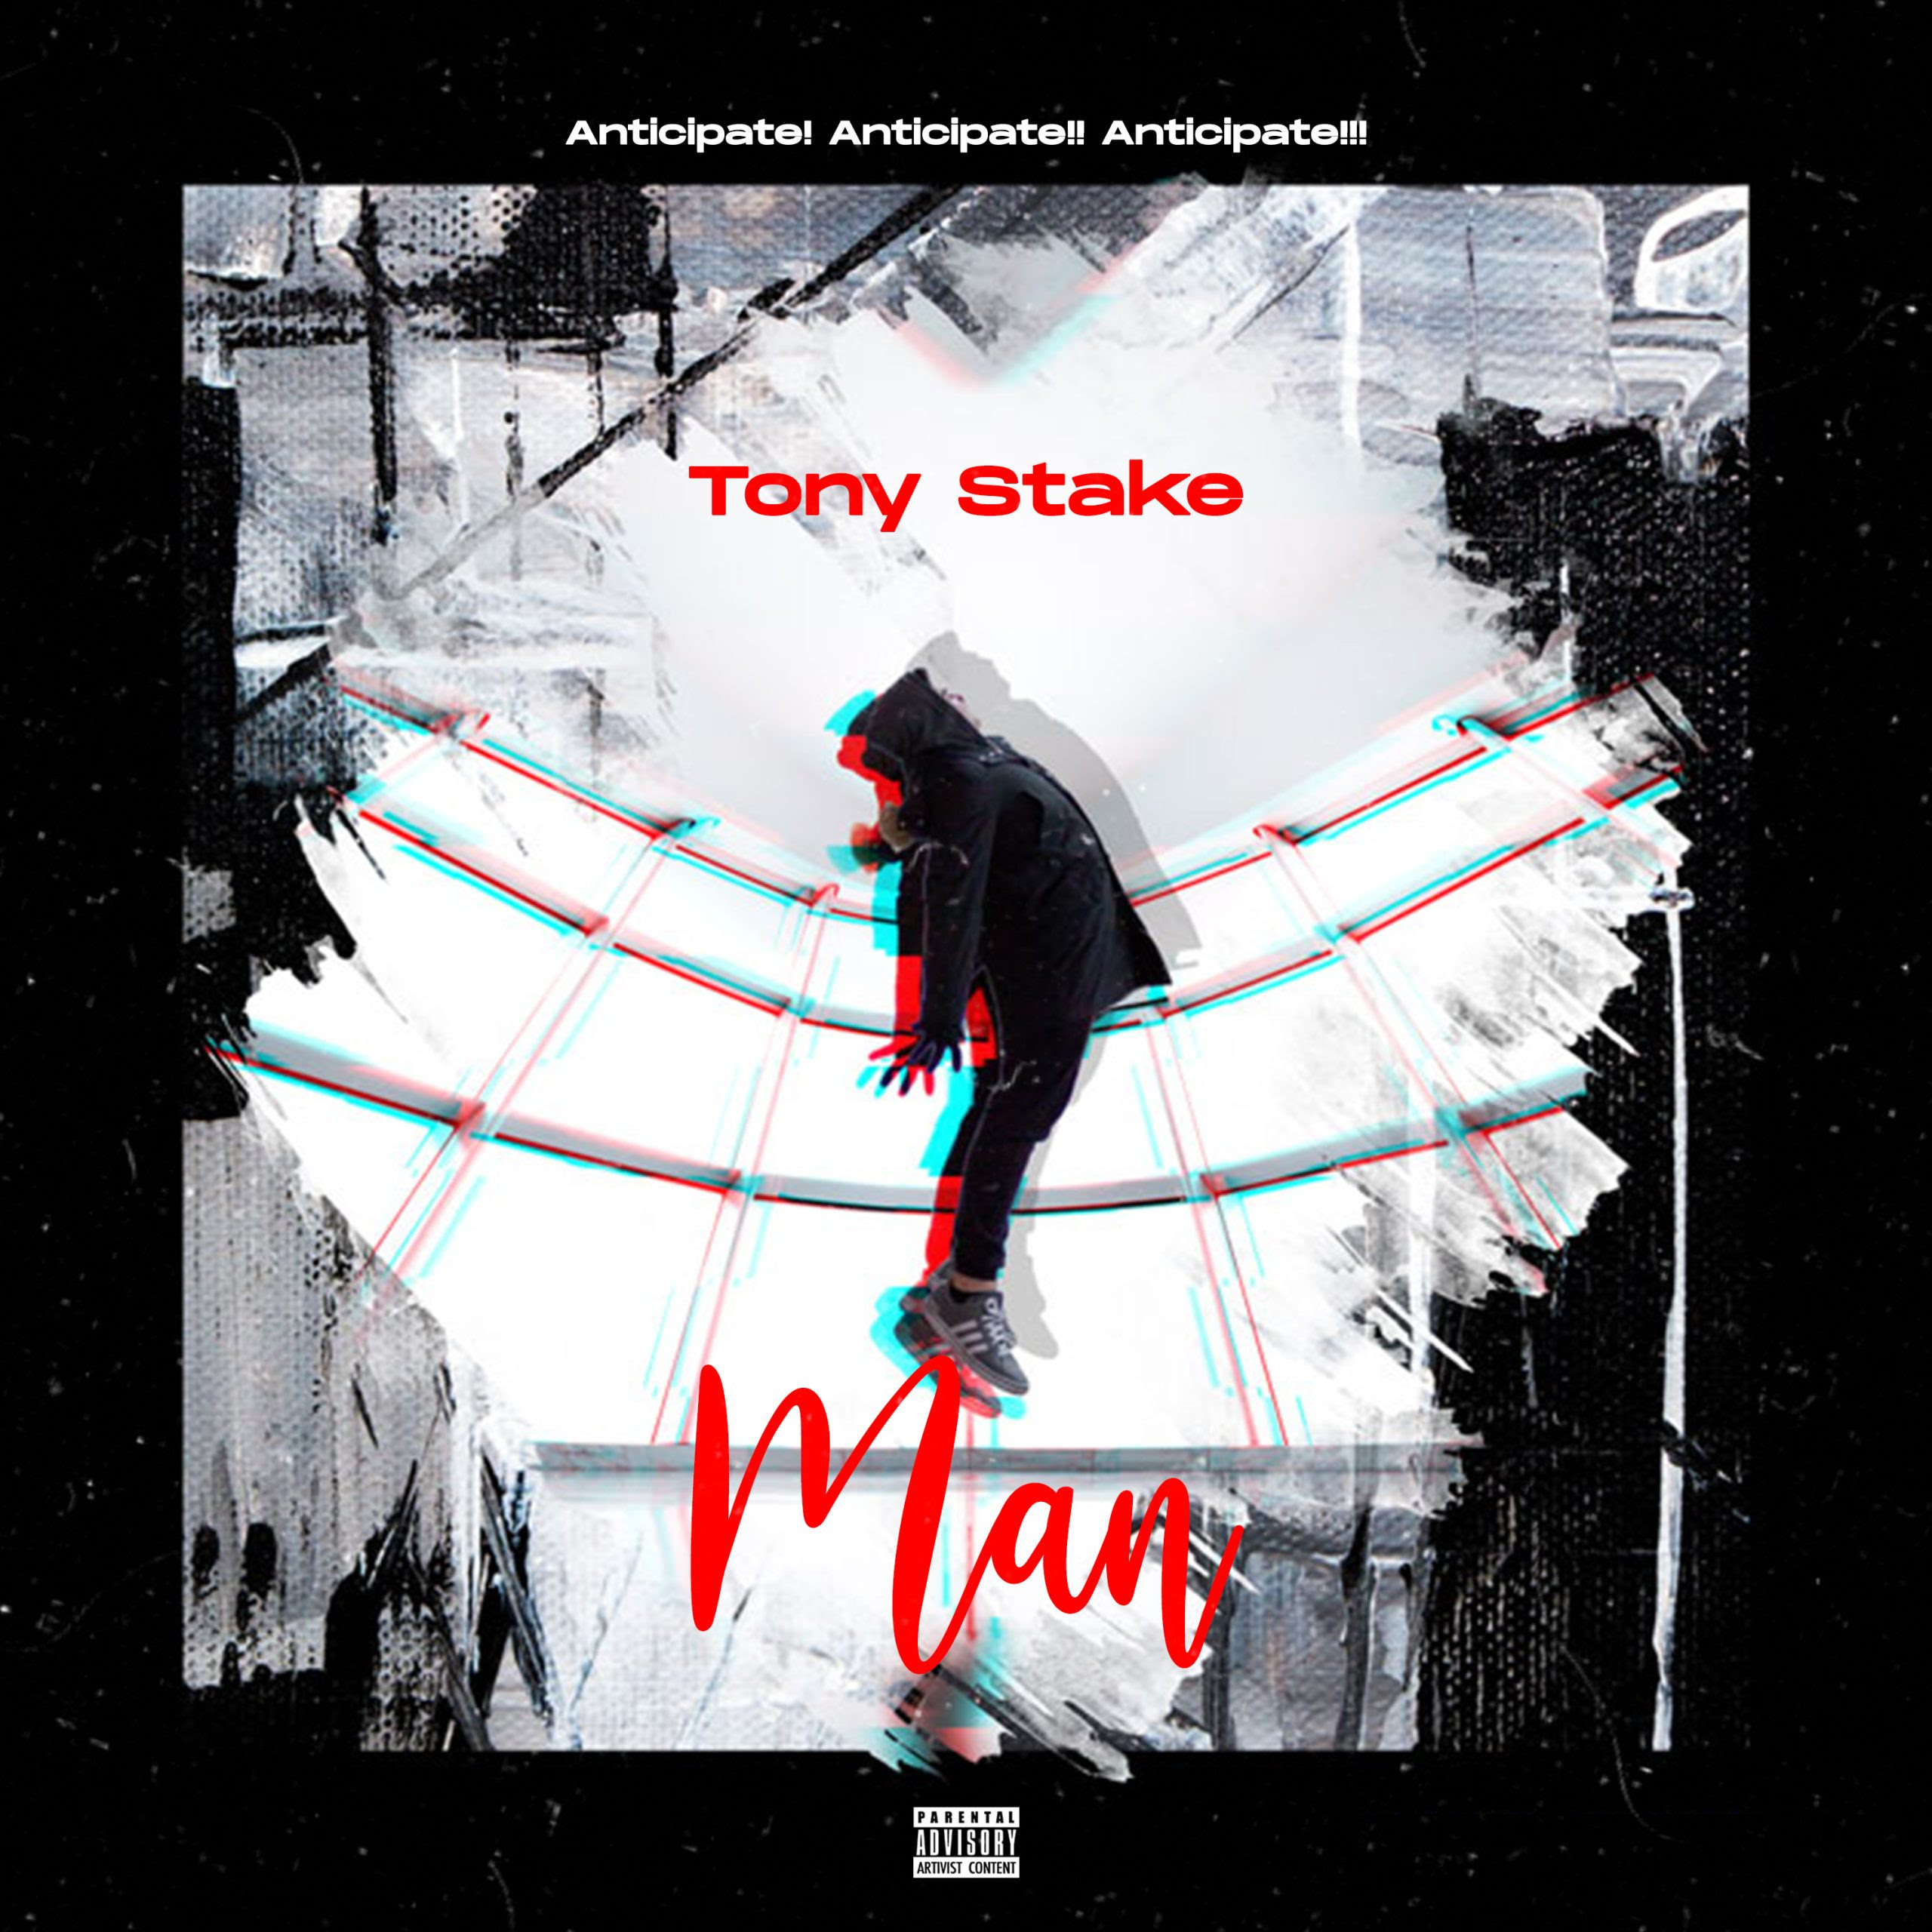 Tony Stake Set To Release A New Single Titled "Man" 4